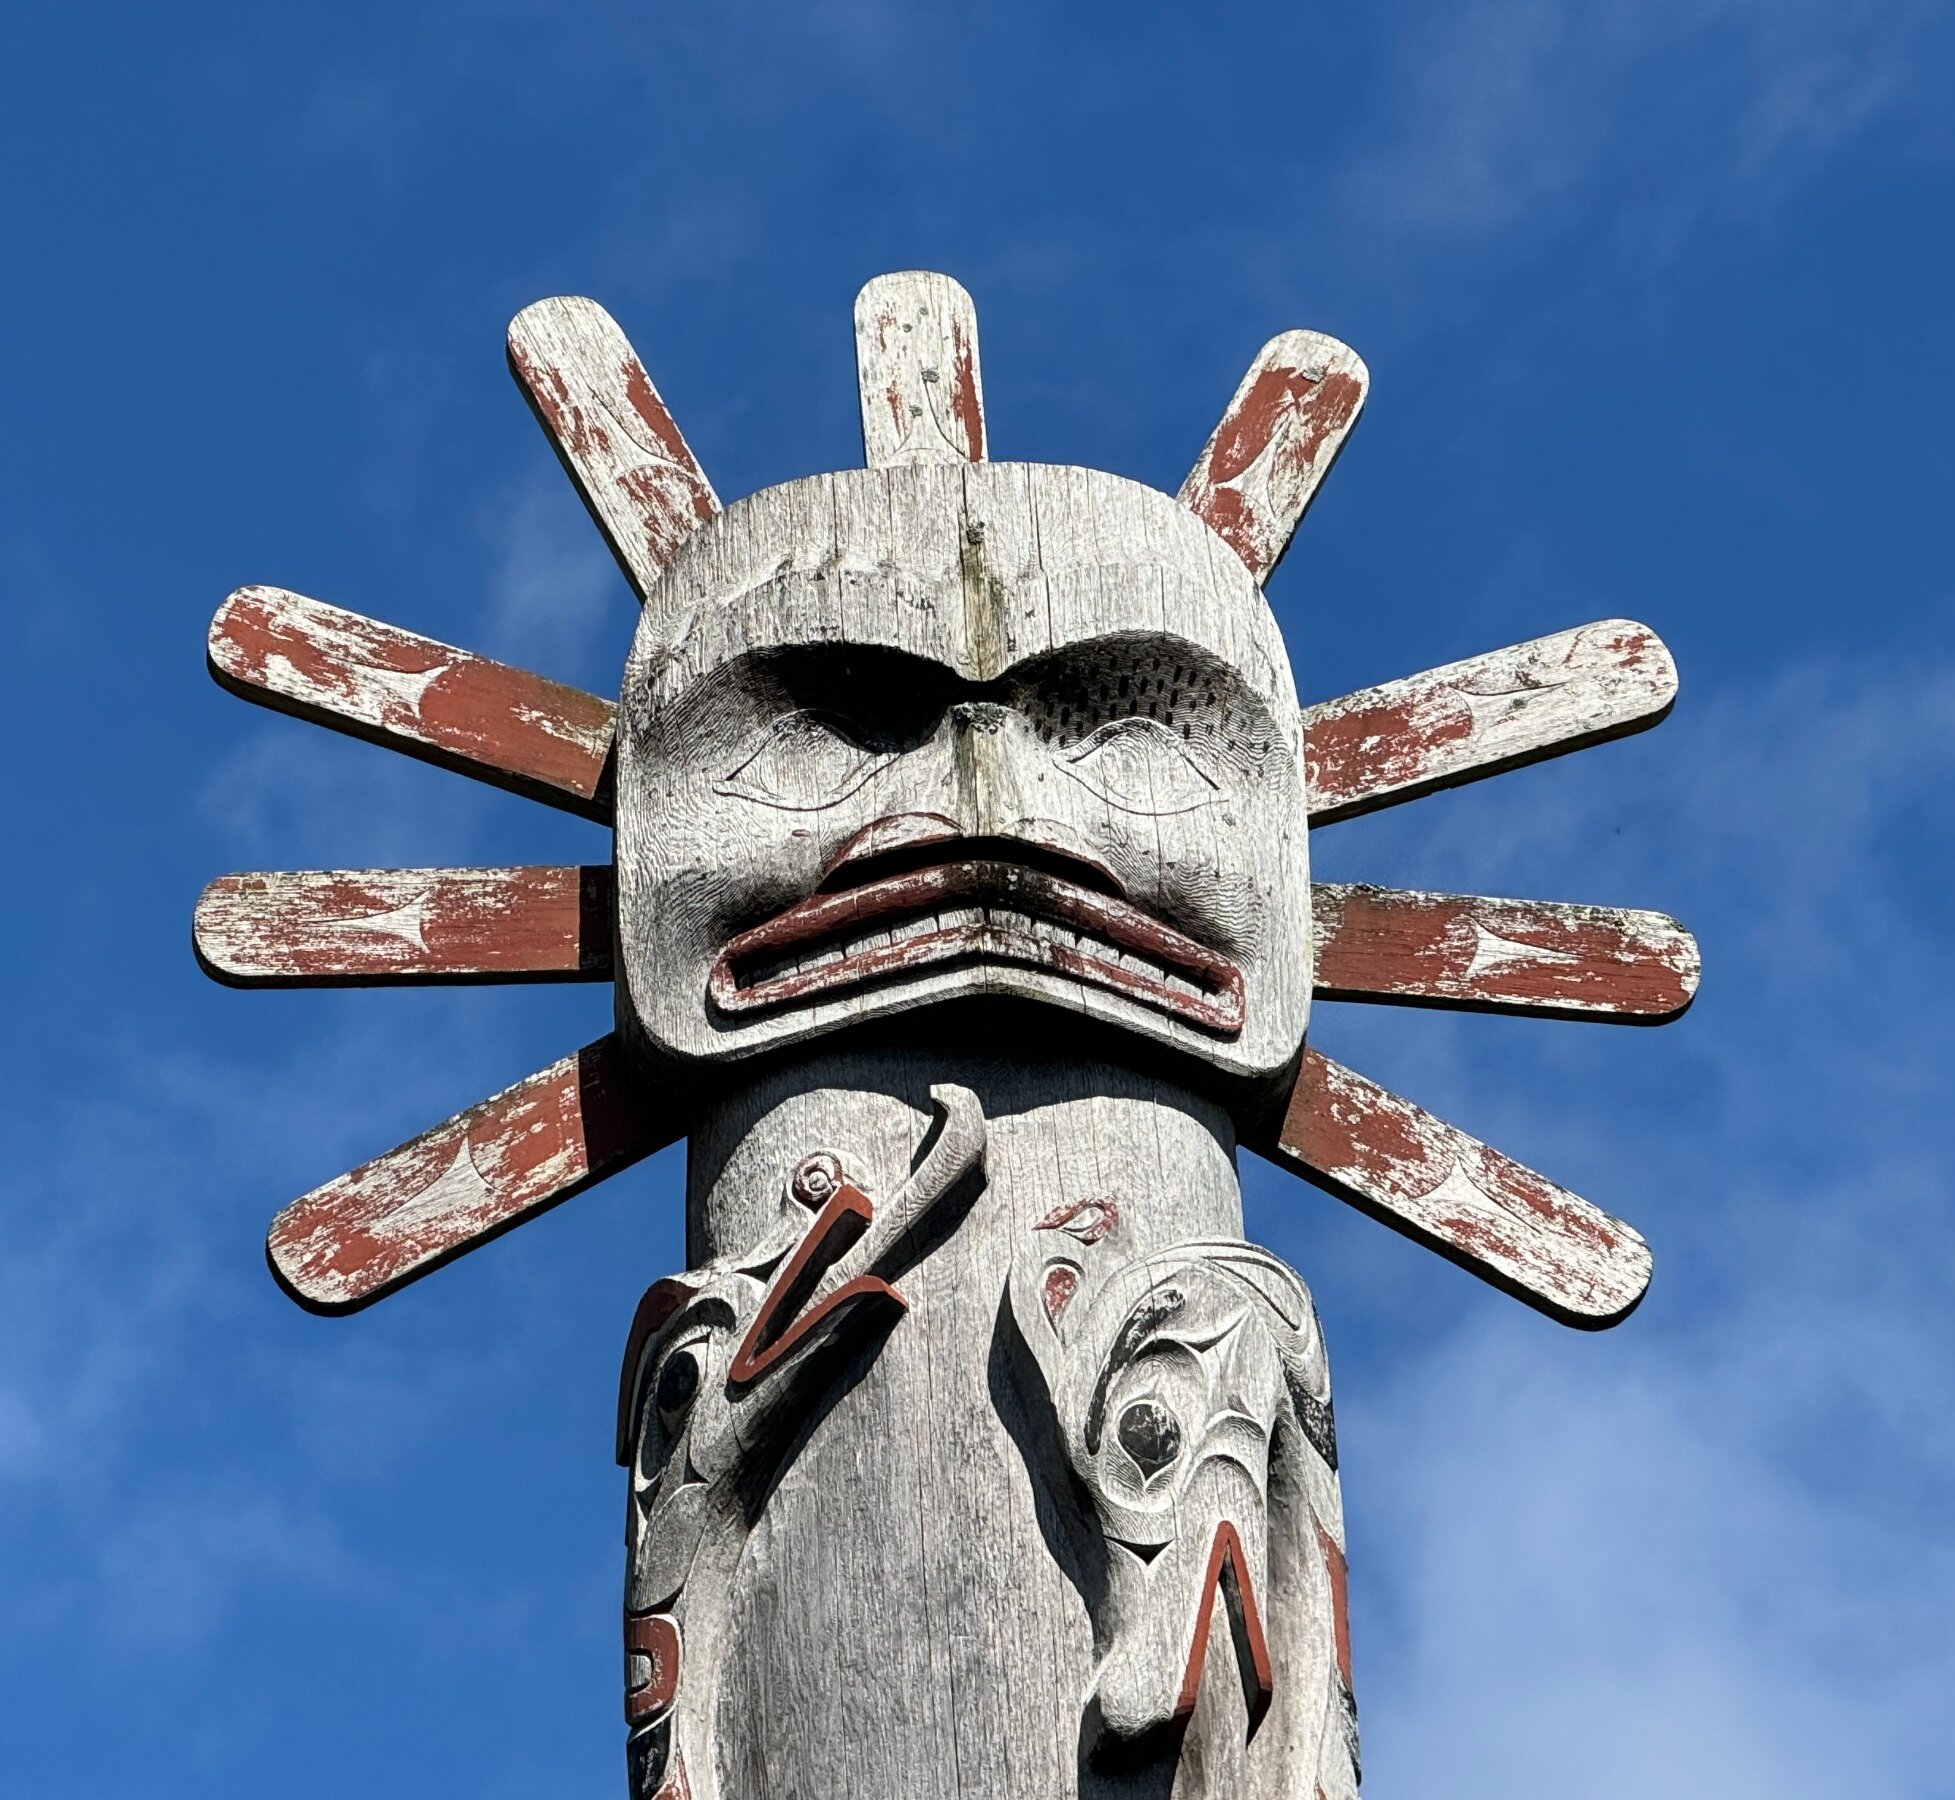 Top of a totem pole against the blue sky